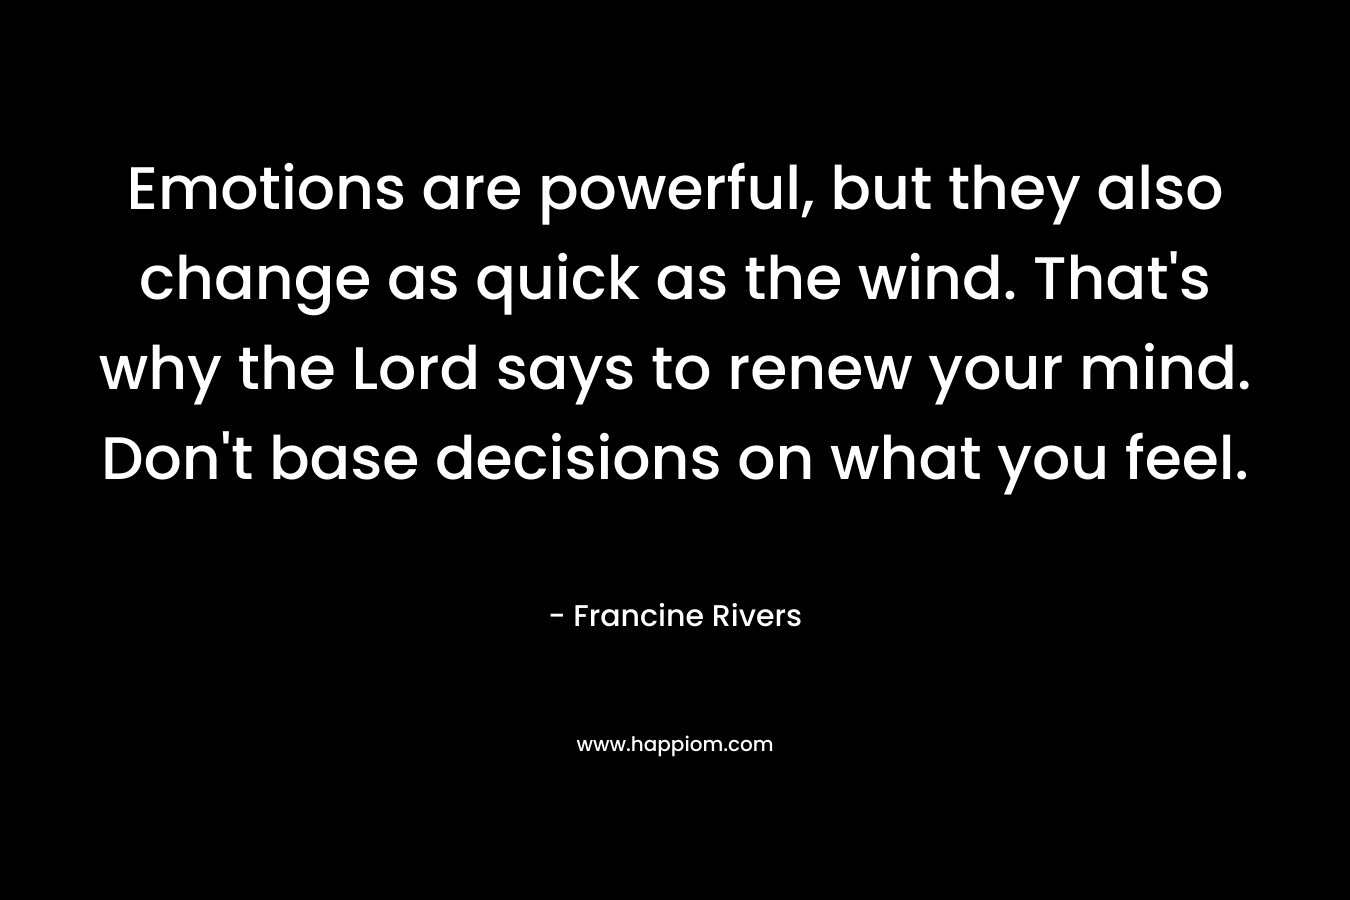 Emotions are powerful, but they also change as quick as the wind. That's why the Lord says to renew your mind. Don't base decisions on what you feel.